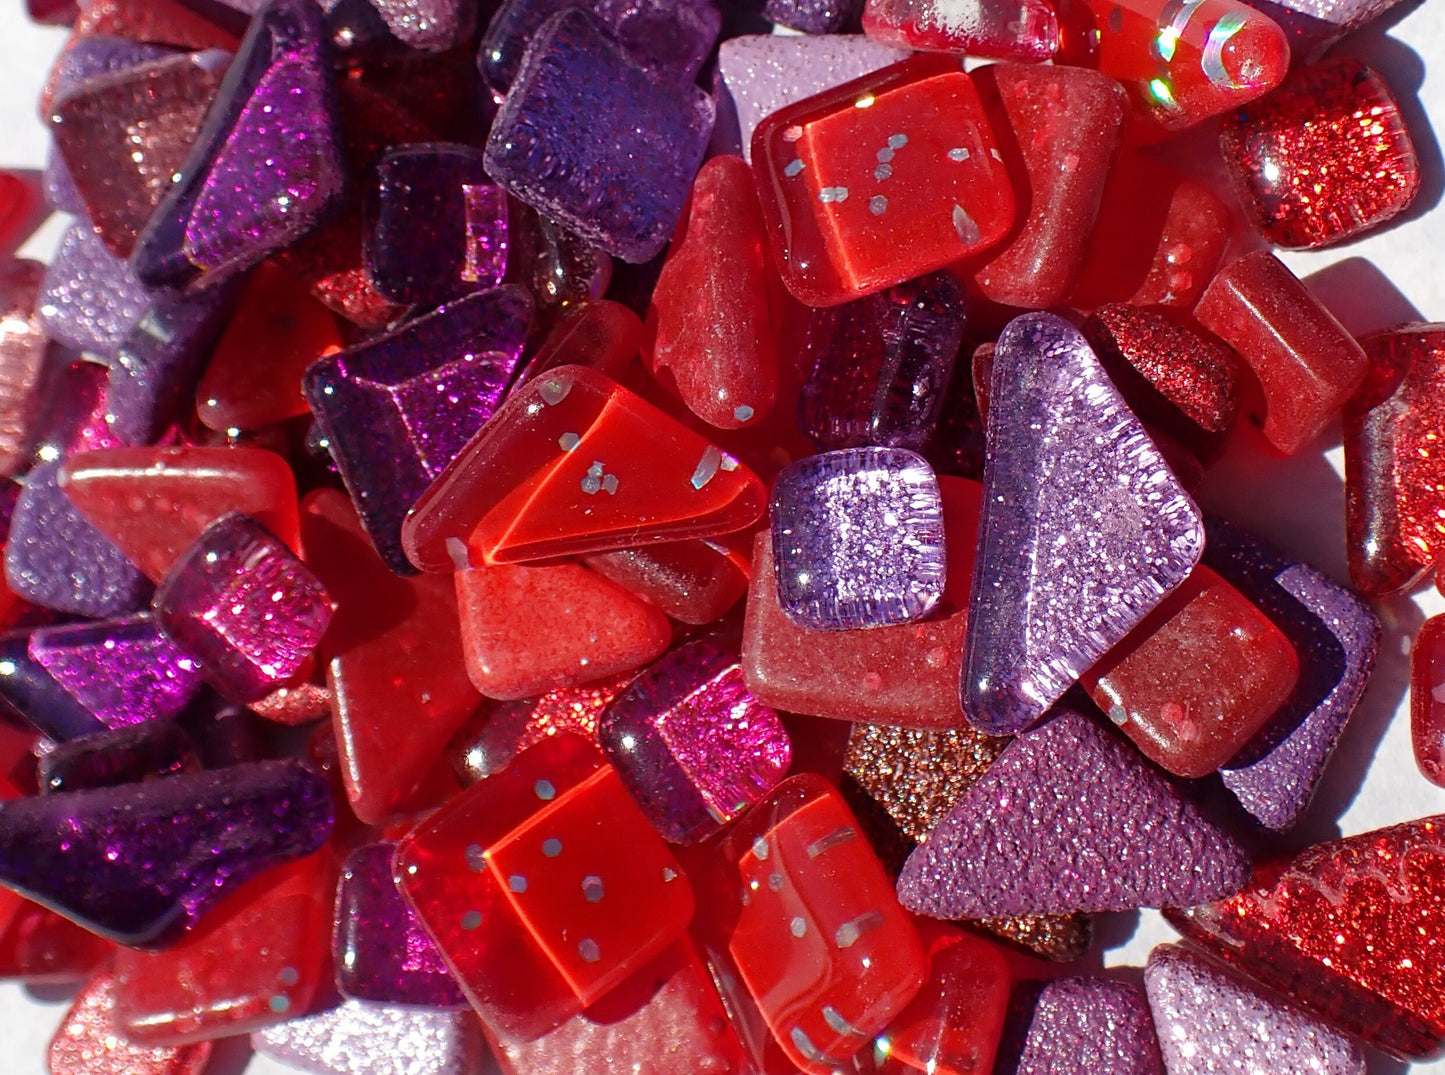 Purple Passion Glitter Tiles - Assorted Shapes and Colors - 100 grams Mosaic Puzzle Tiles Glass